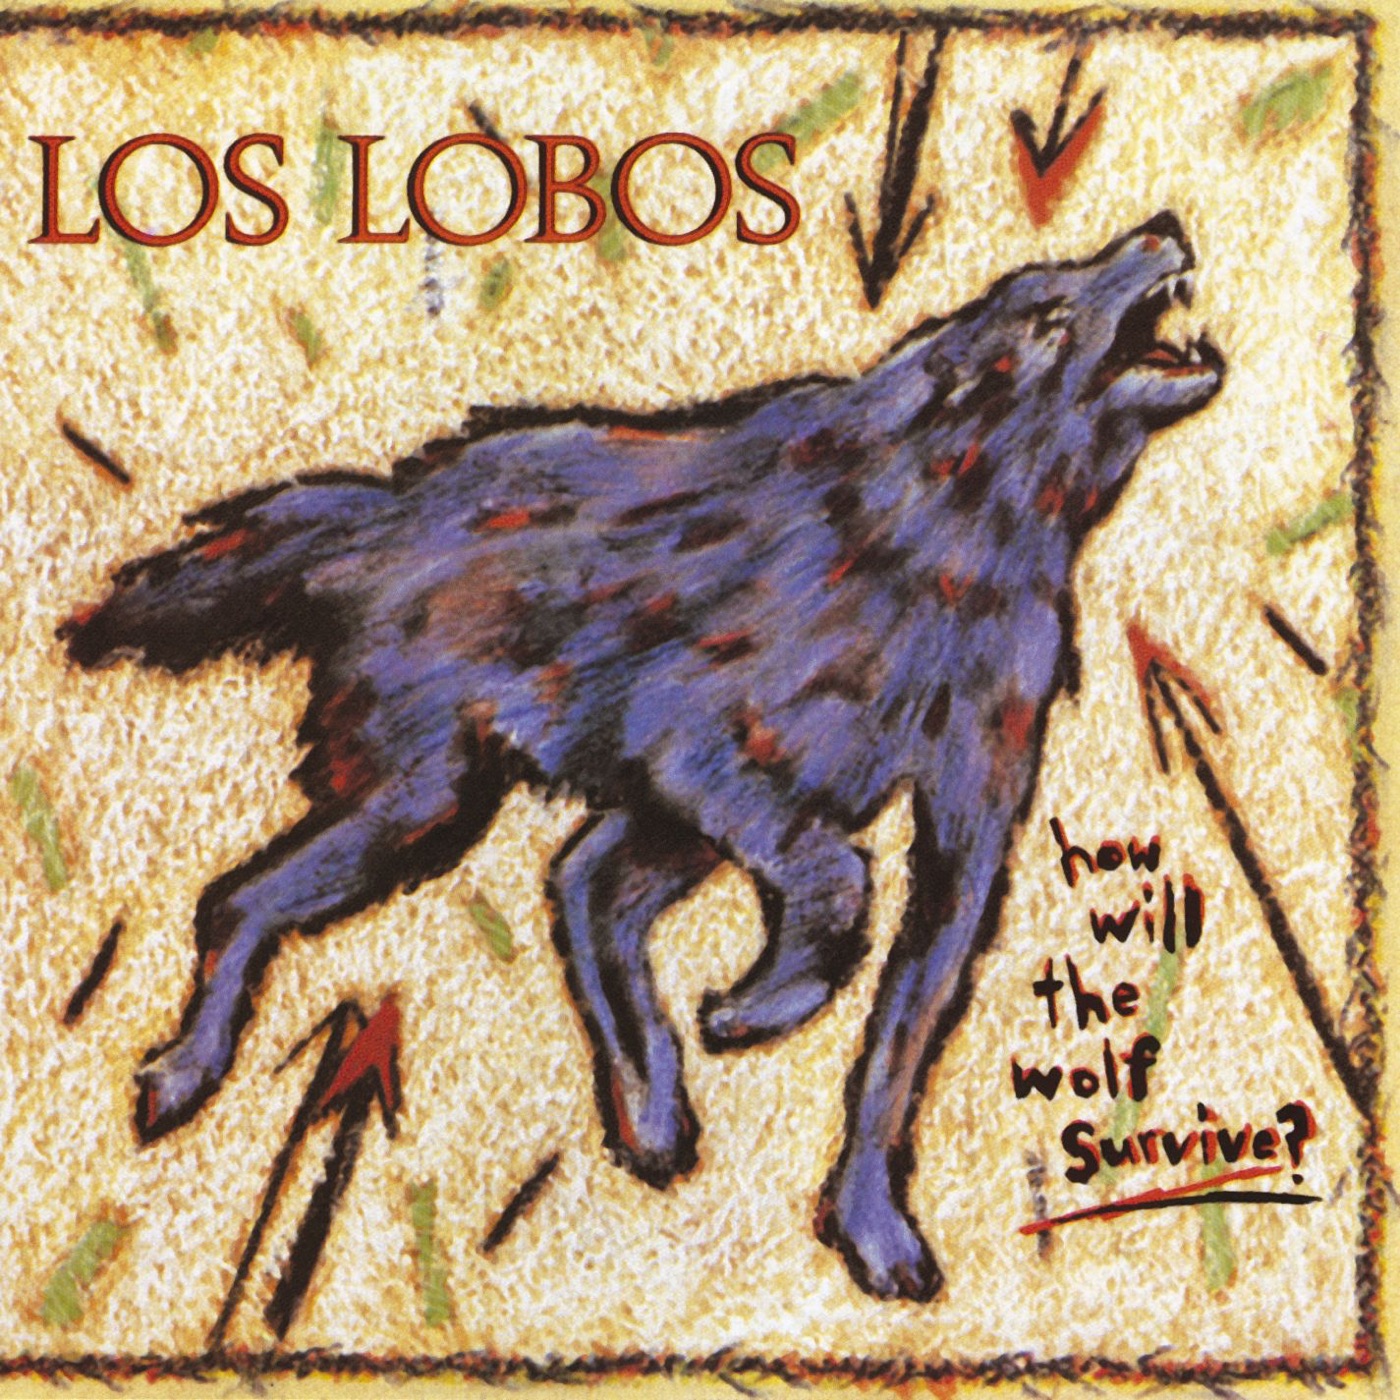 How Will the Wolf Survive? by Los Lobos